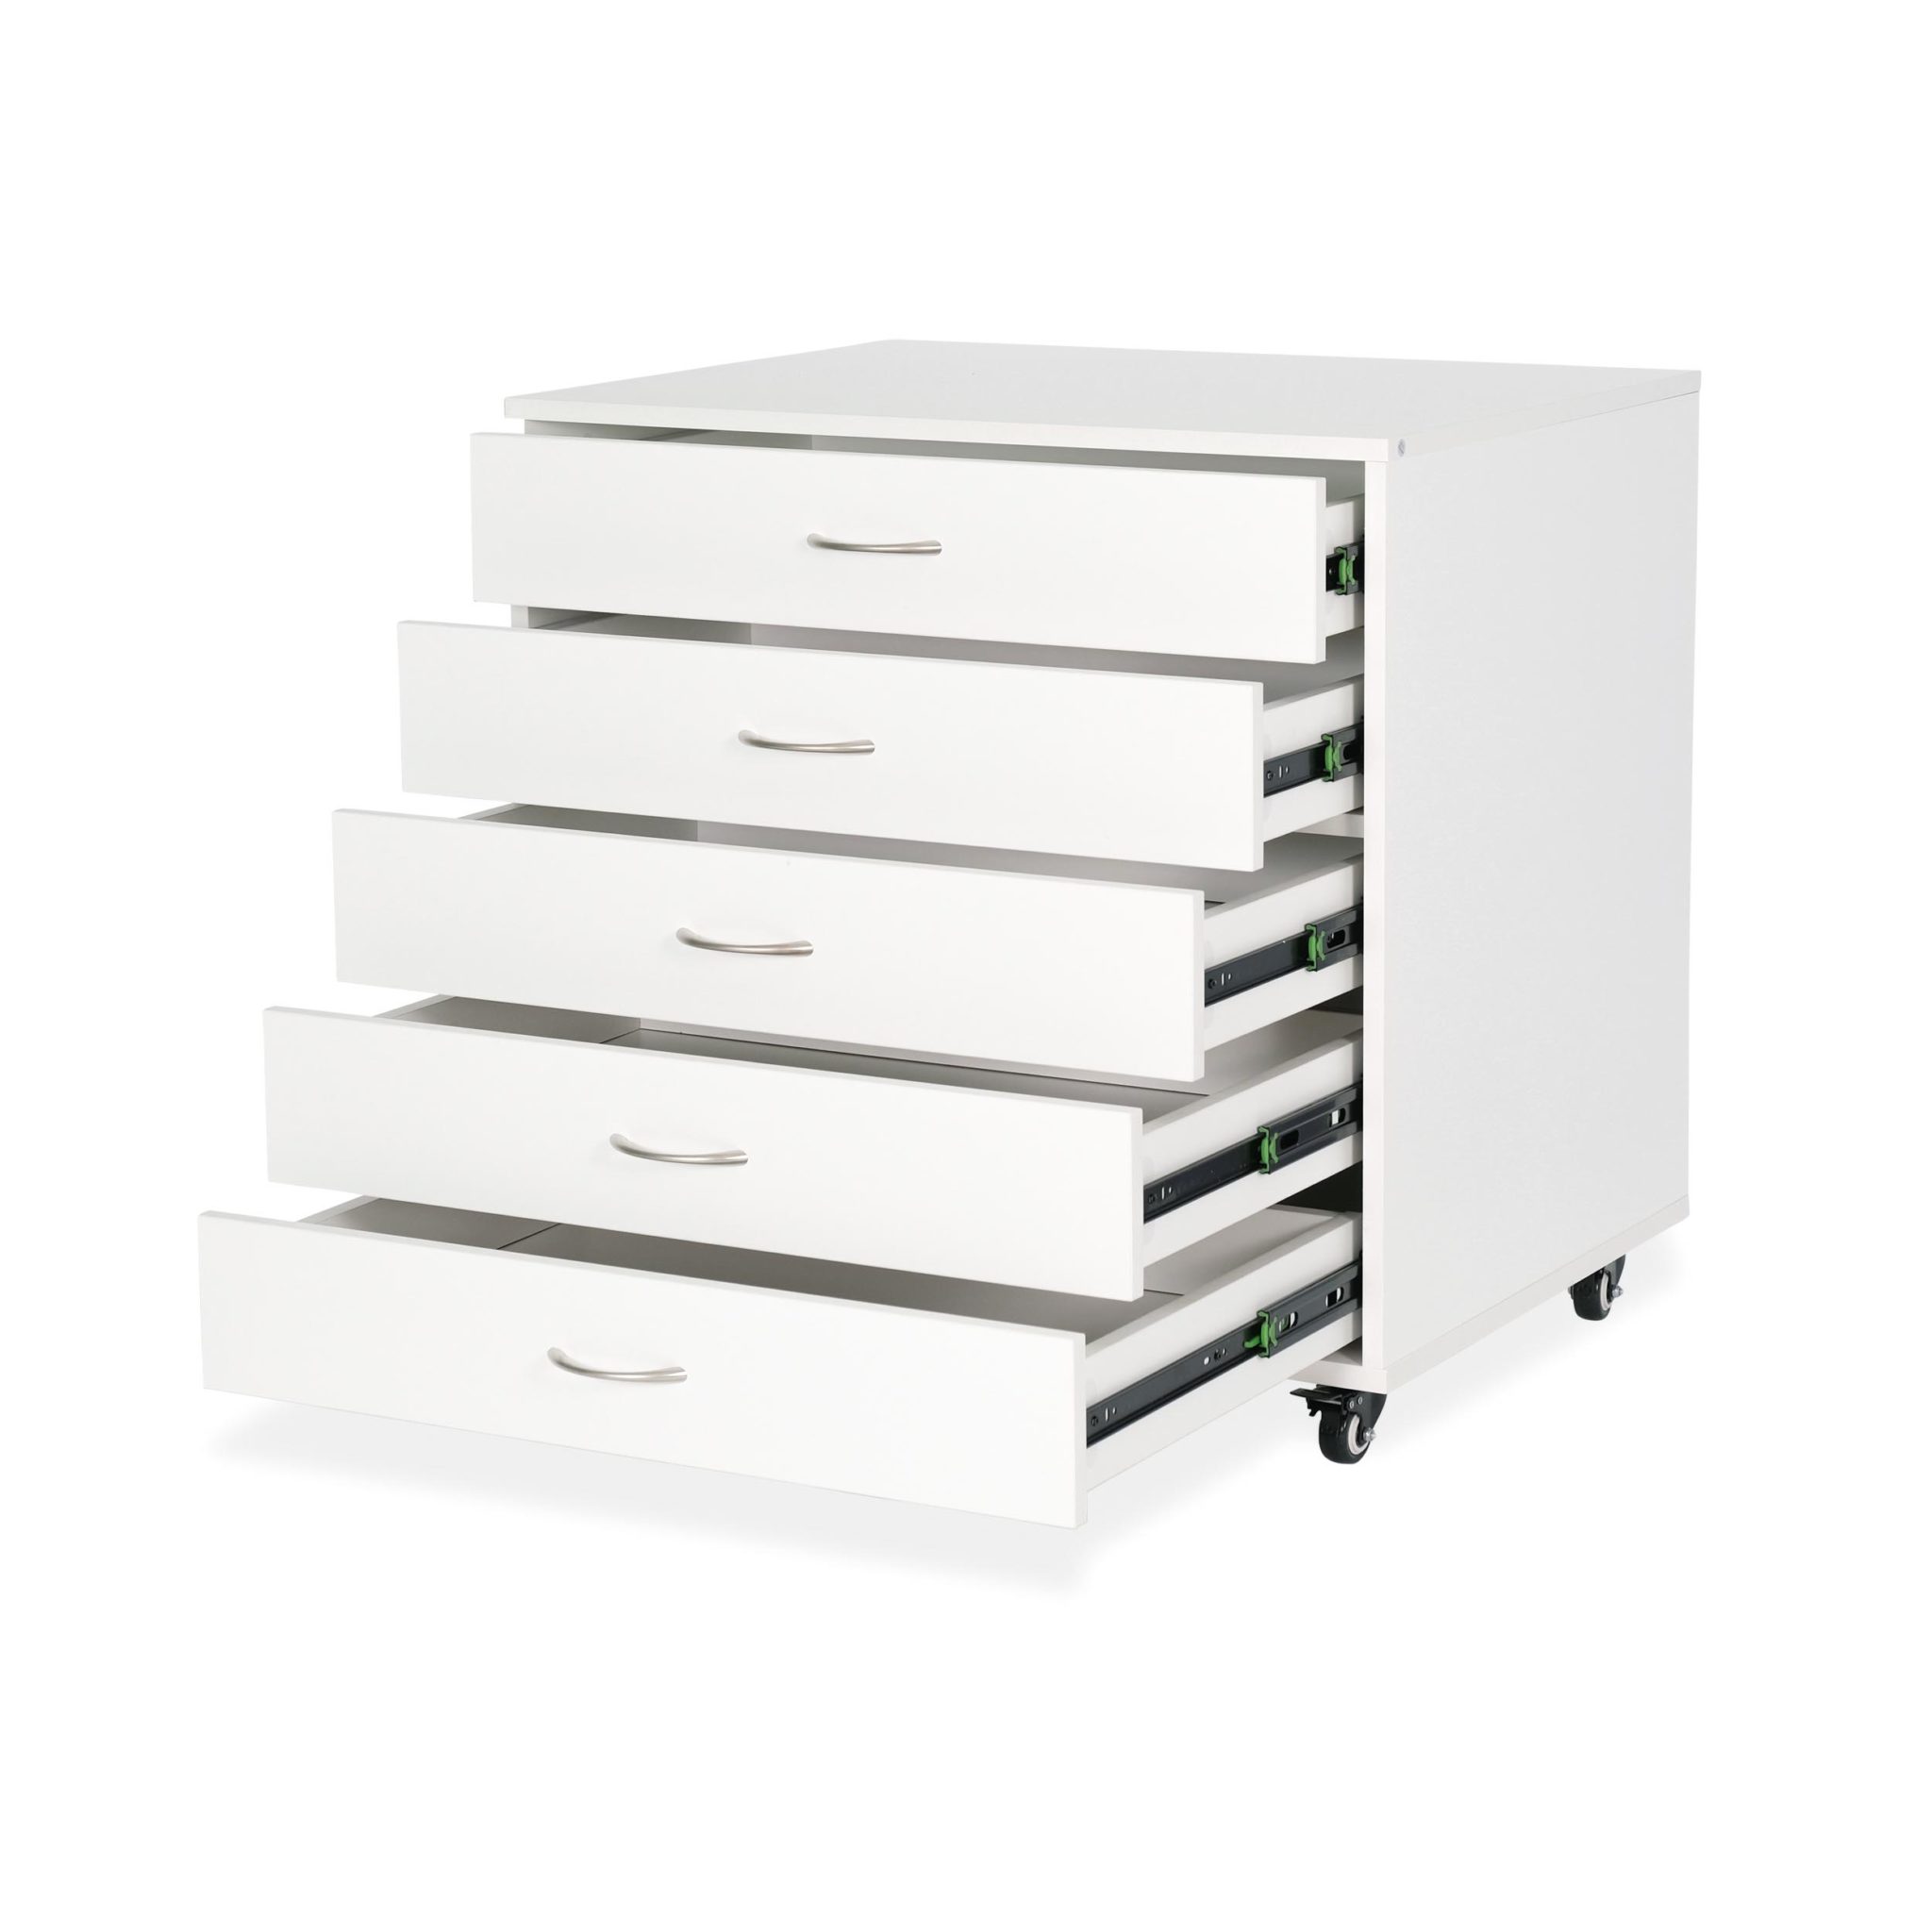 MOD 5 Drawer Storage Cabinet features 5 expansive storage drawers for your fabric, thread, sewing notions, hoops and accessories! 4 heavy-duty casters make this cabinet stable, secure and easy to move throughout your studio!